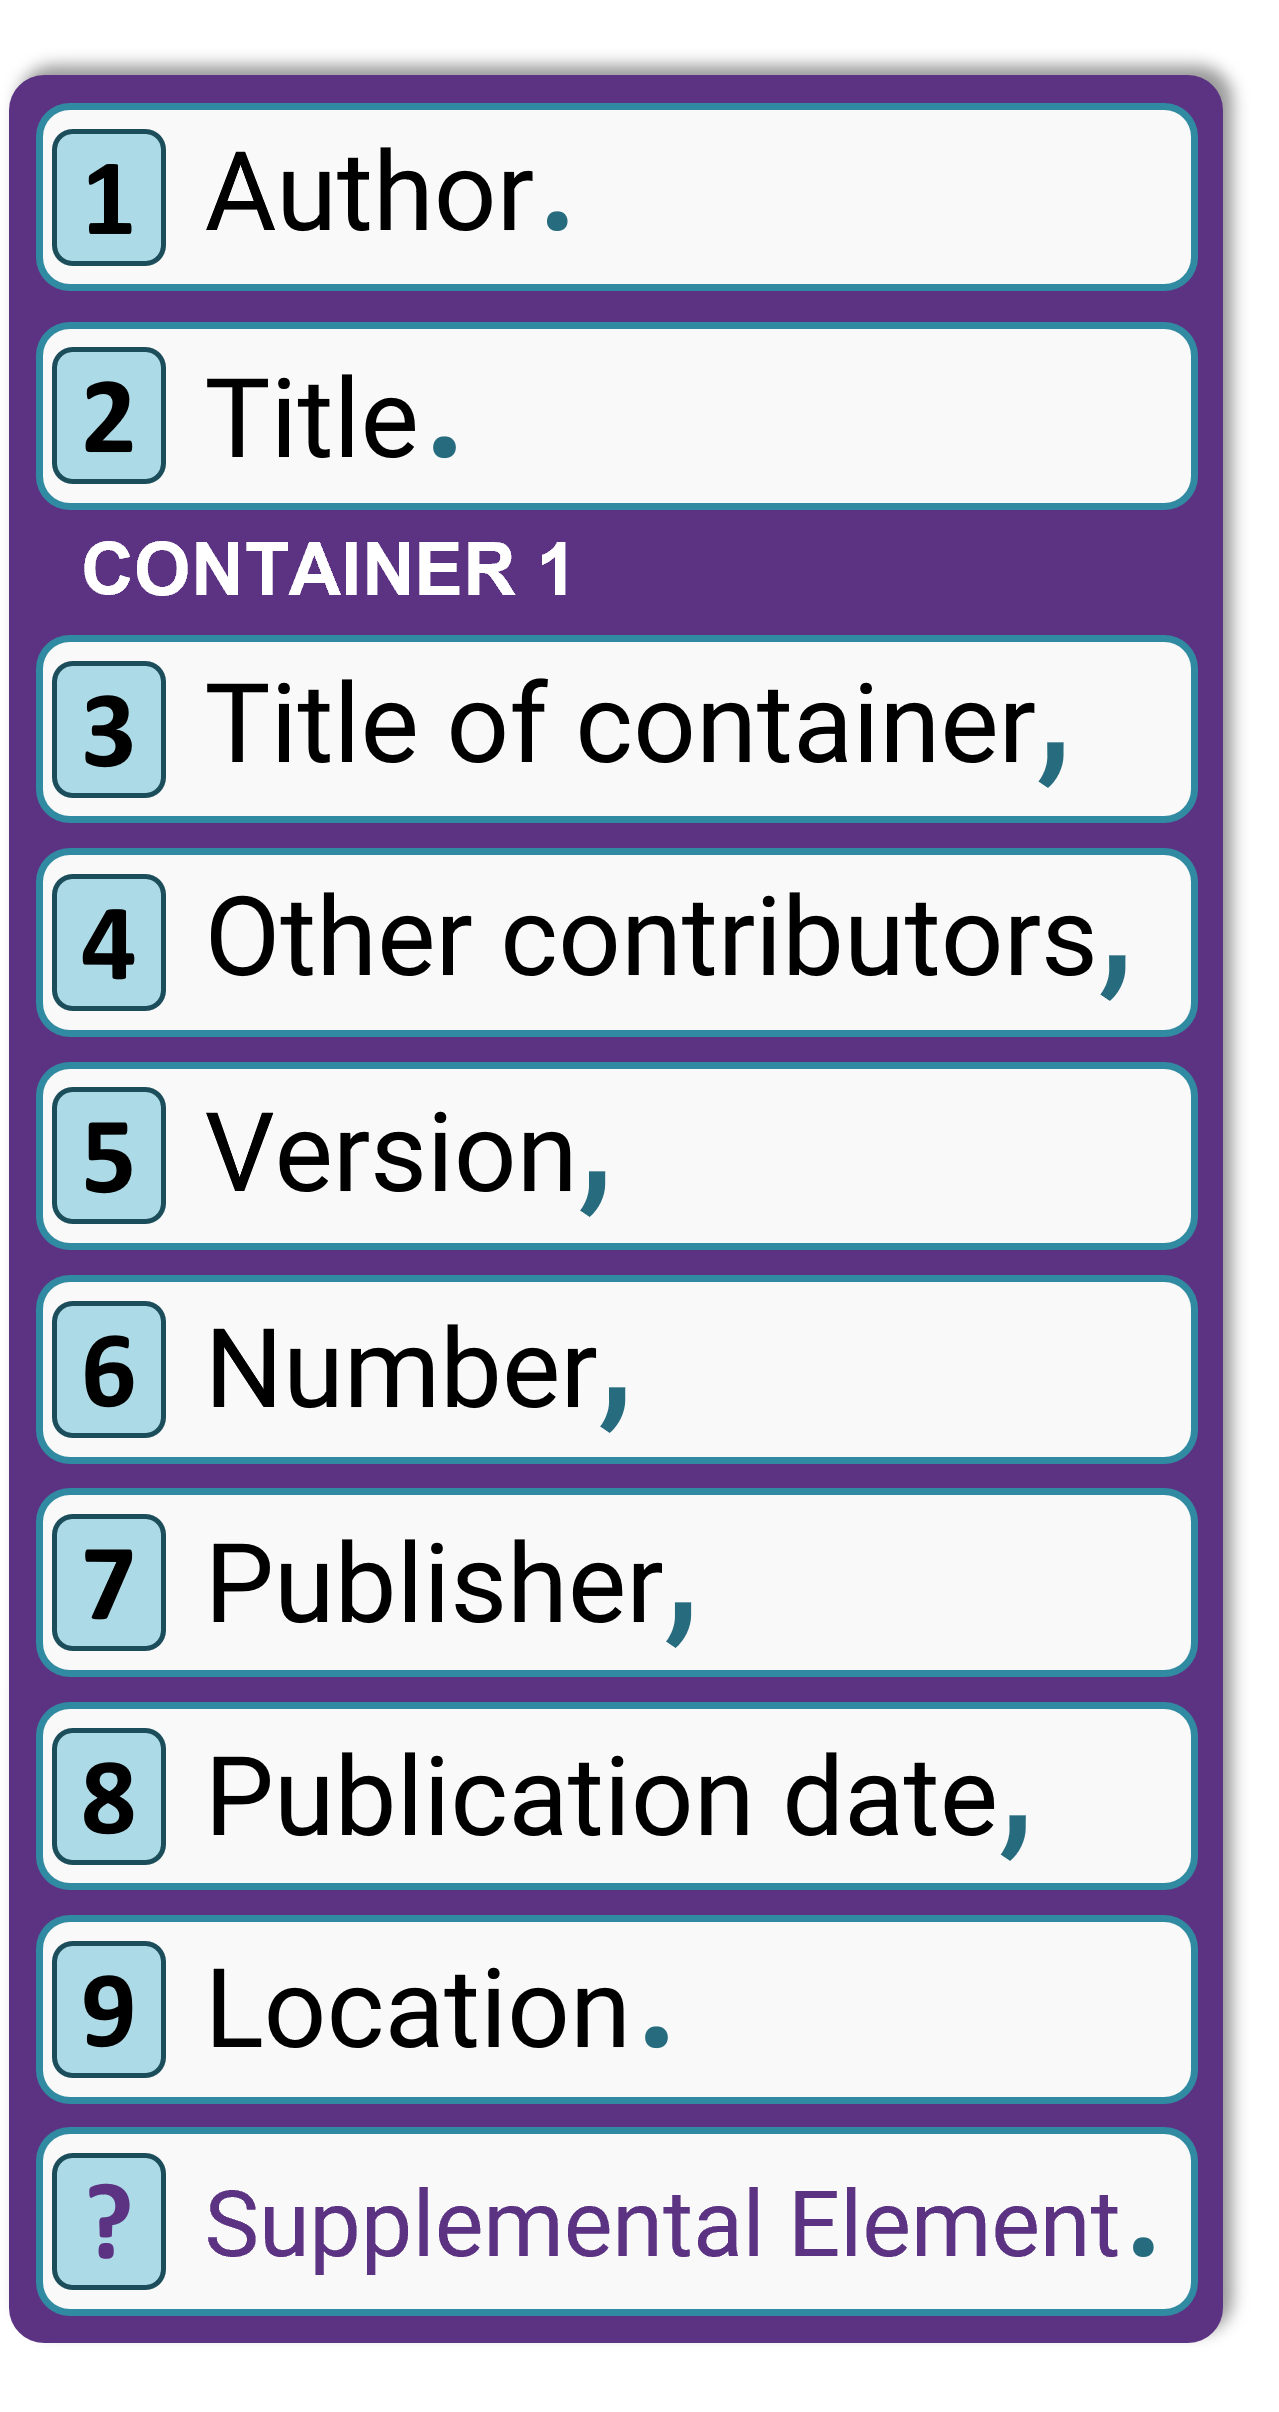 Author. Title. Title of container, other contributors, version, number, publisher, publication date, location. Supplemental element.